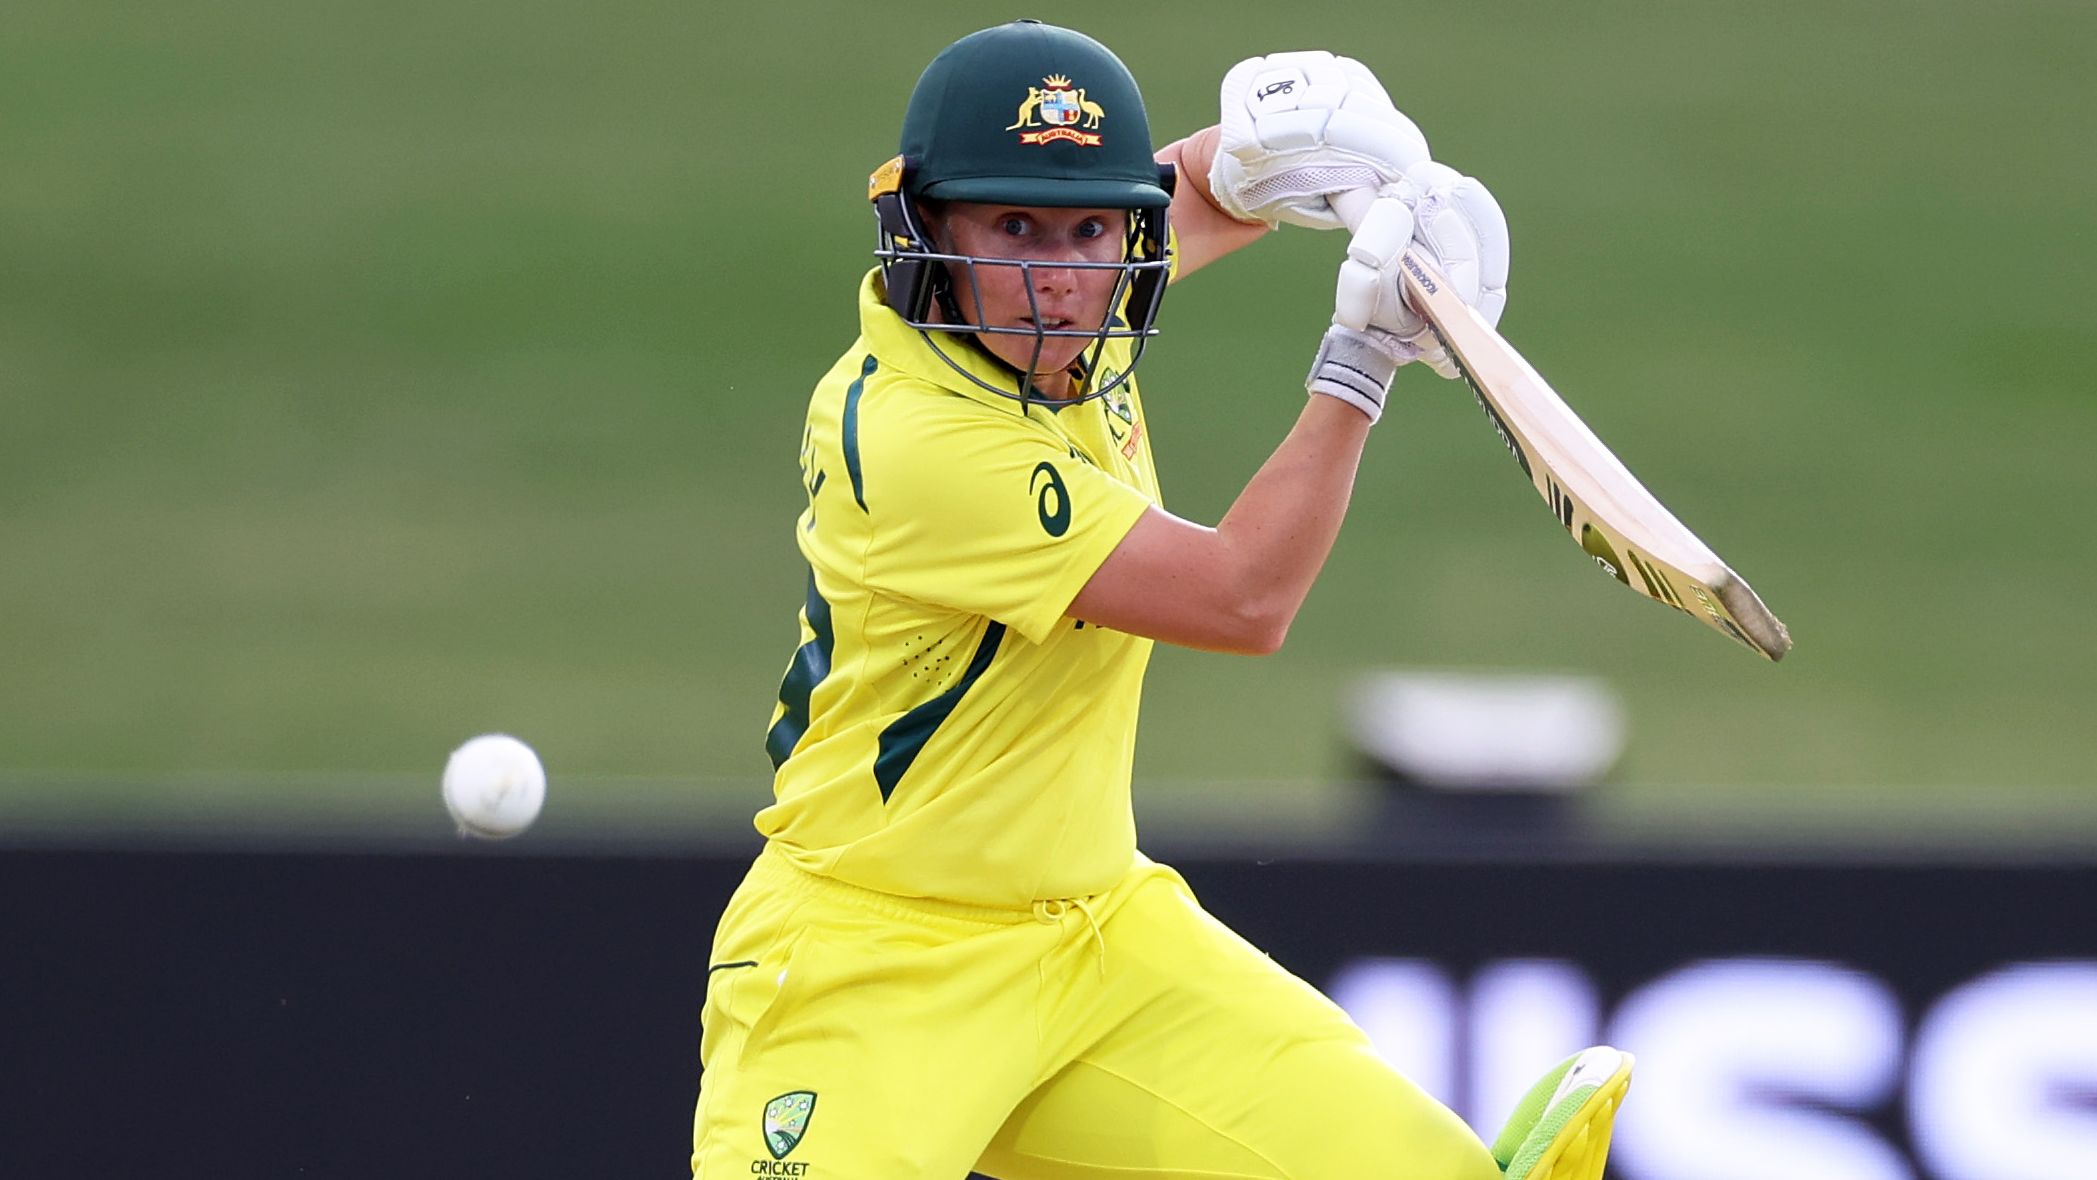 Alyssa Healy of Australia plays a shot during the match between Australia and Pakistan at Bay Oval.